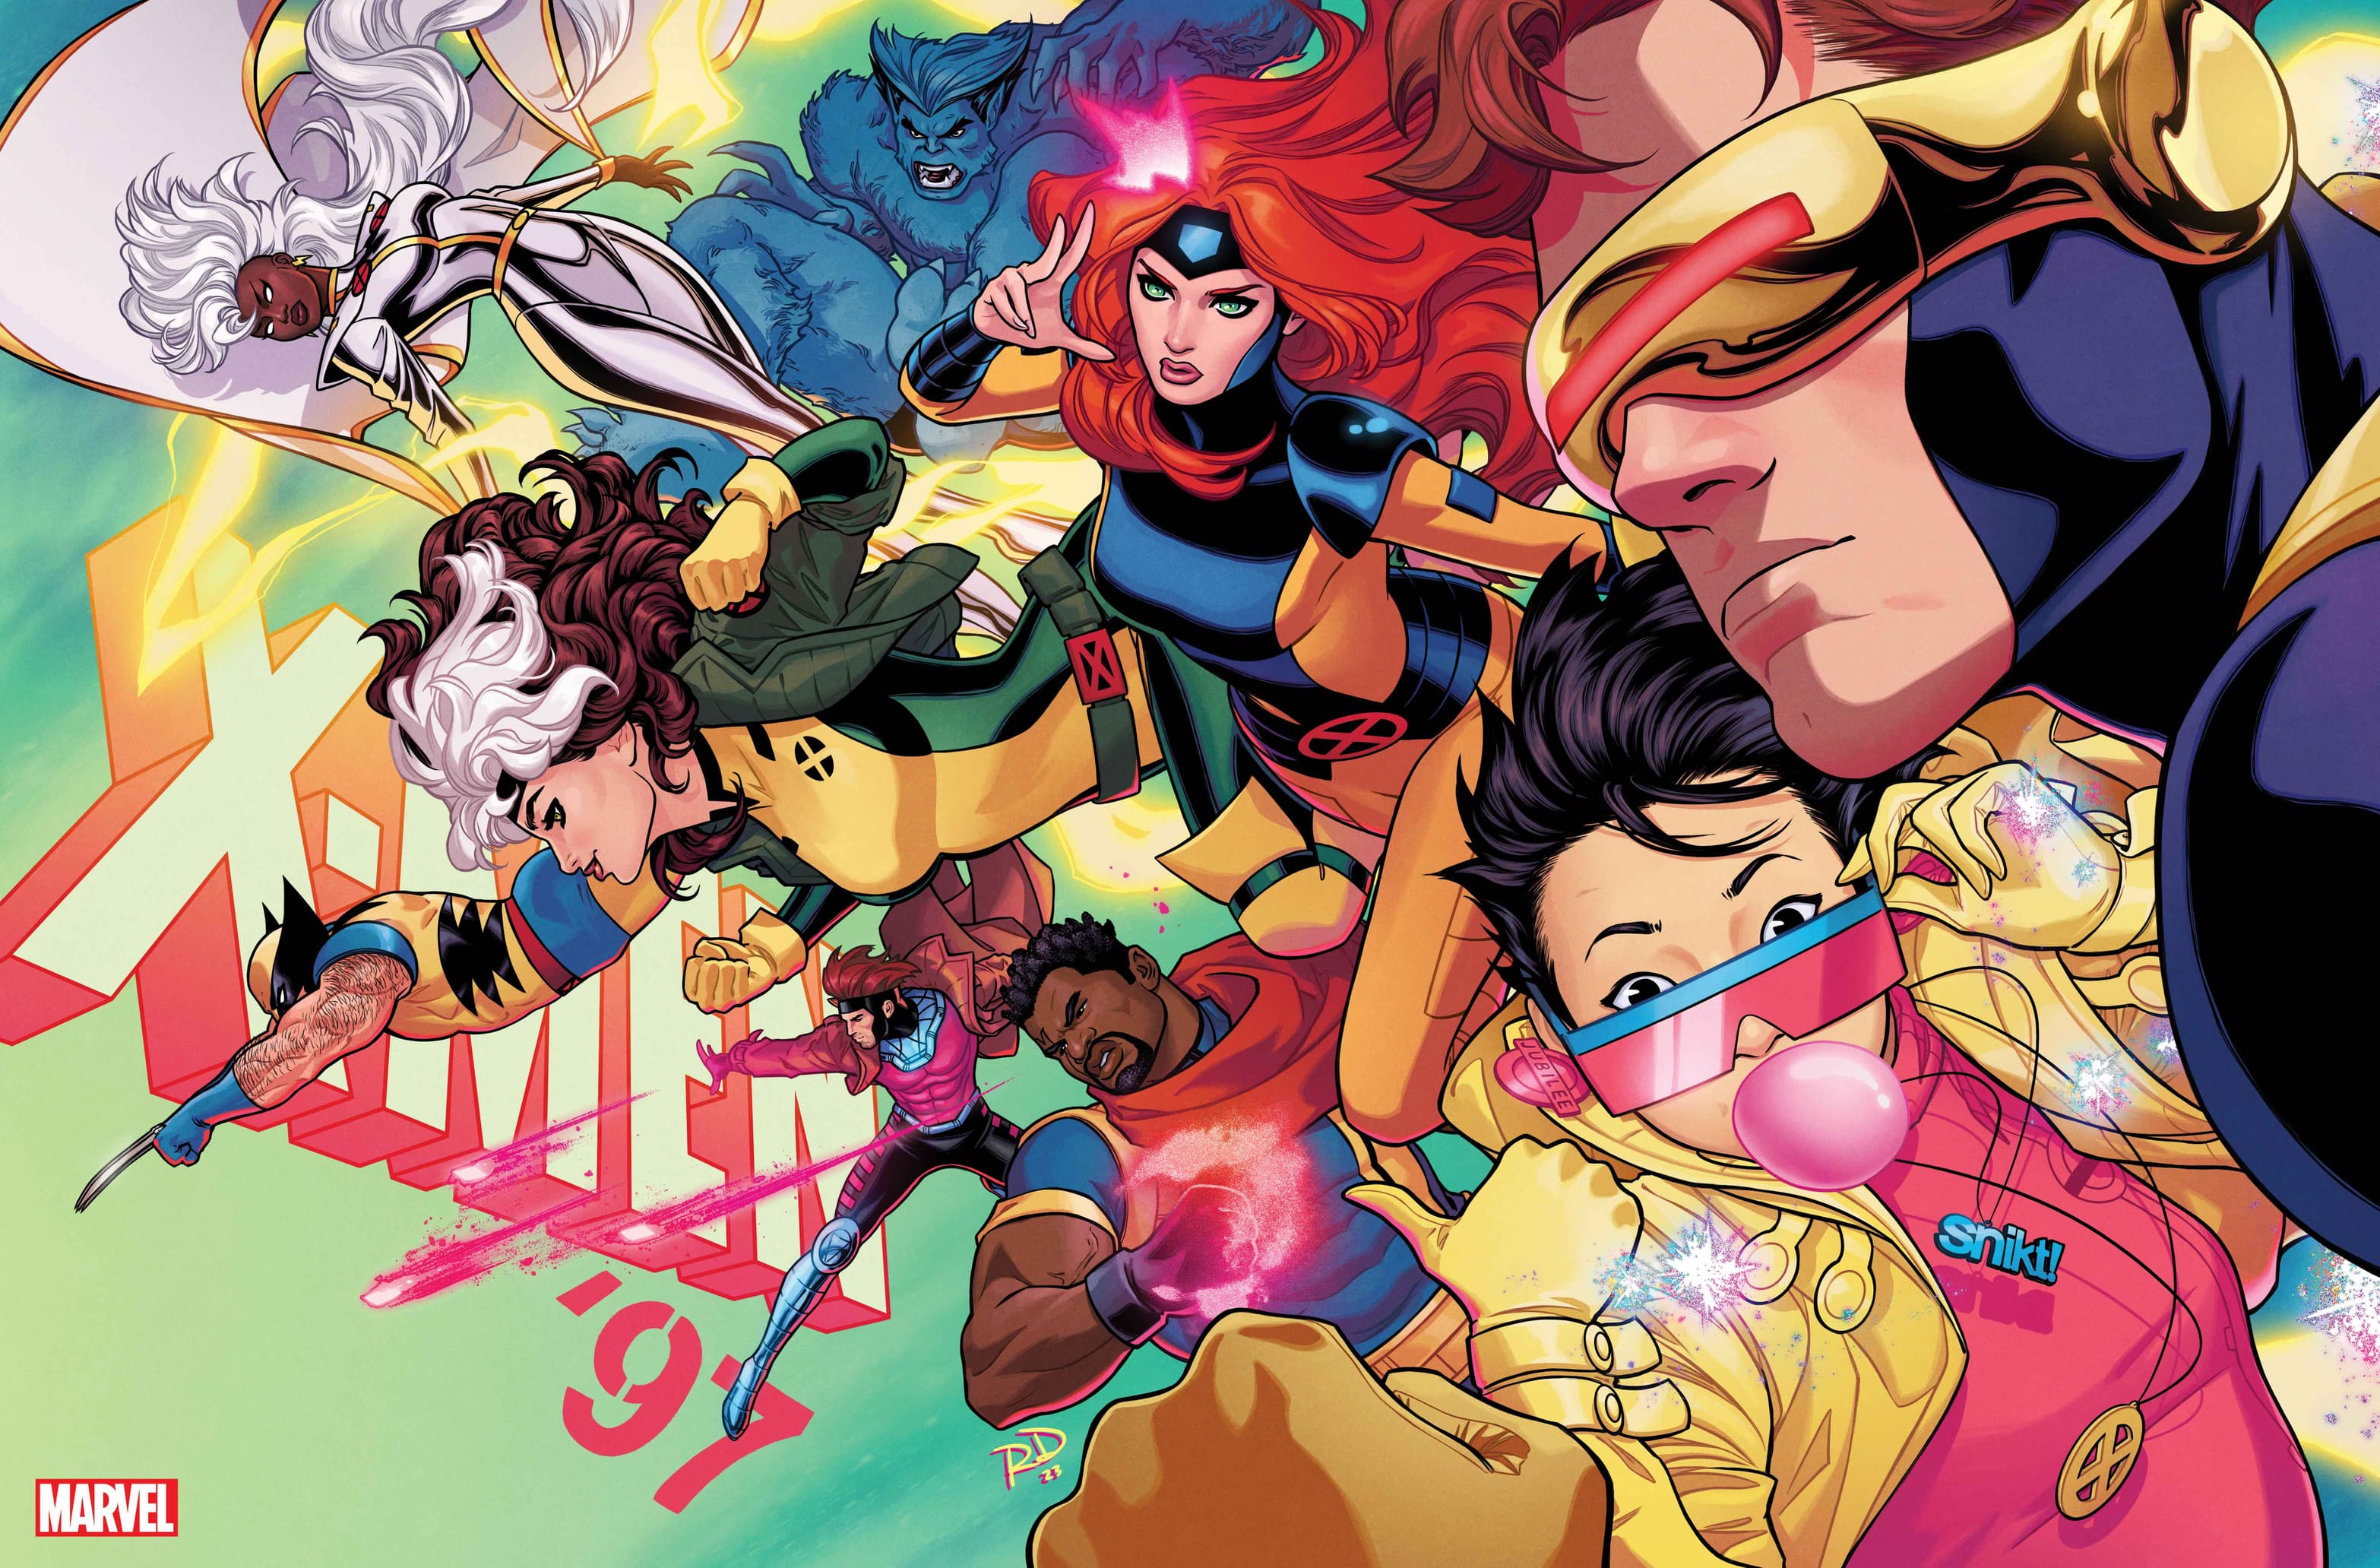 X-MEN '97 #1 Wraparound Variant Cover by Russell Dauterman